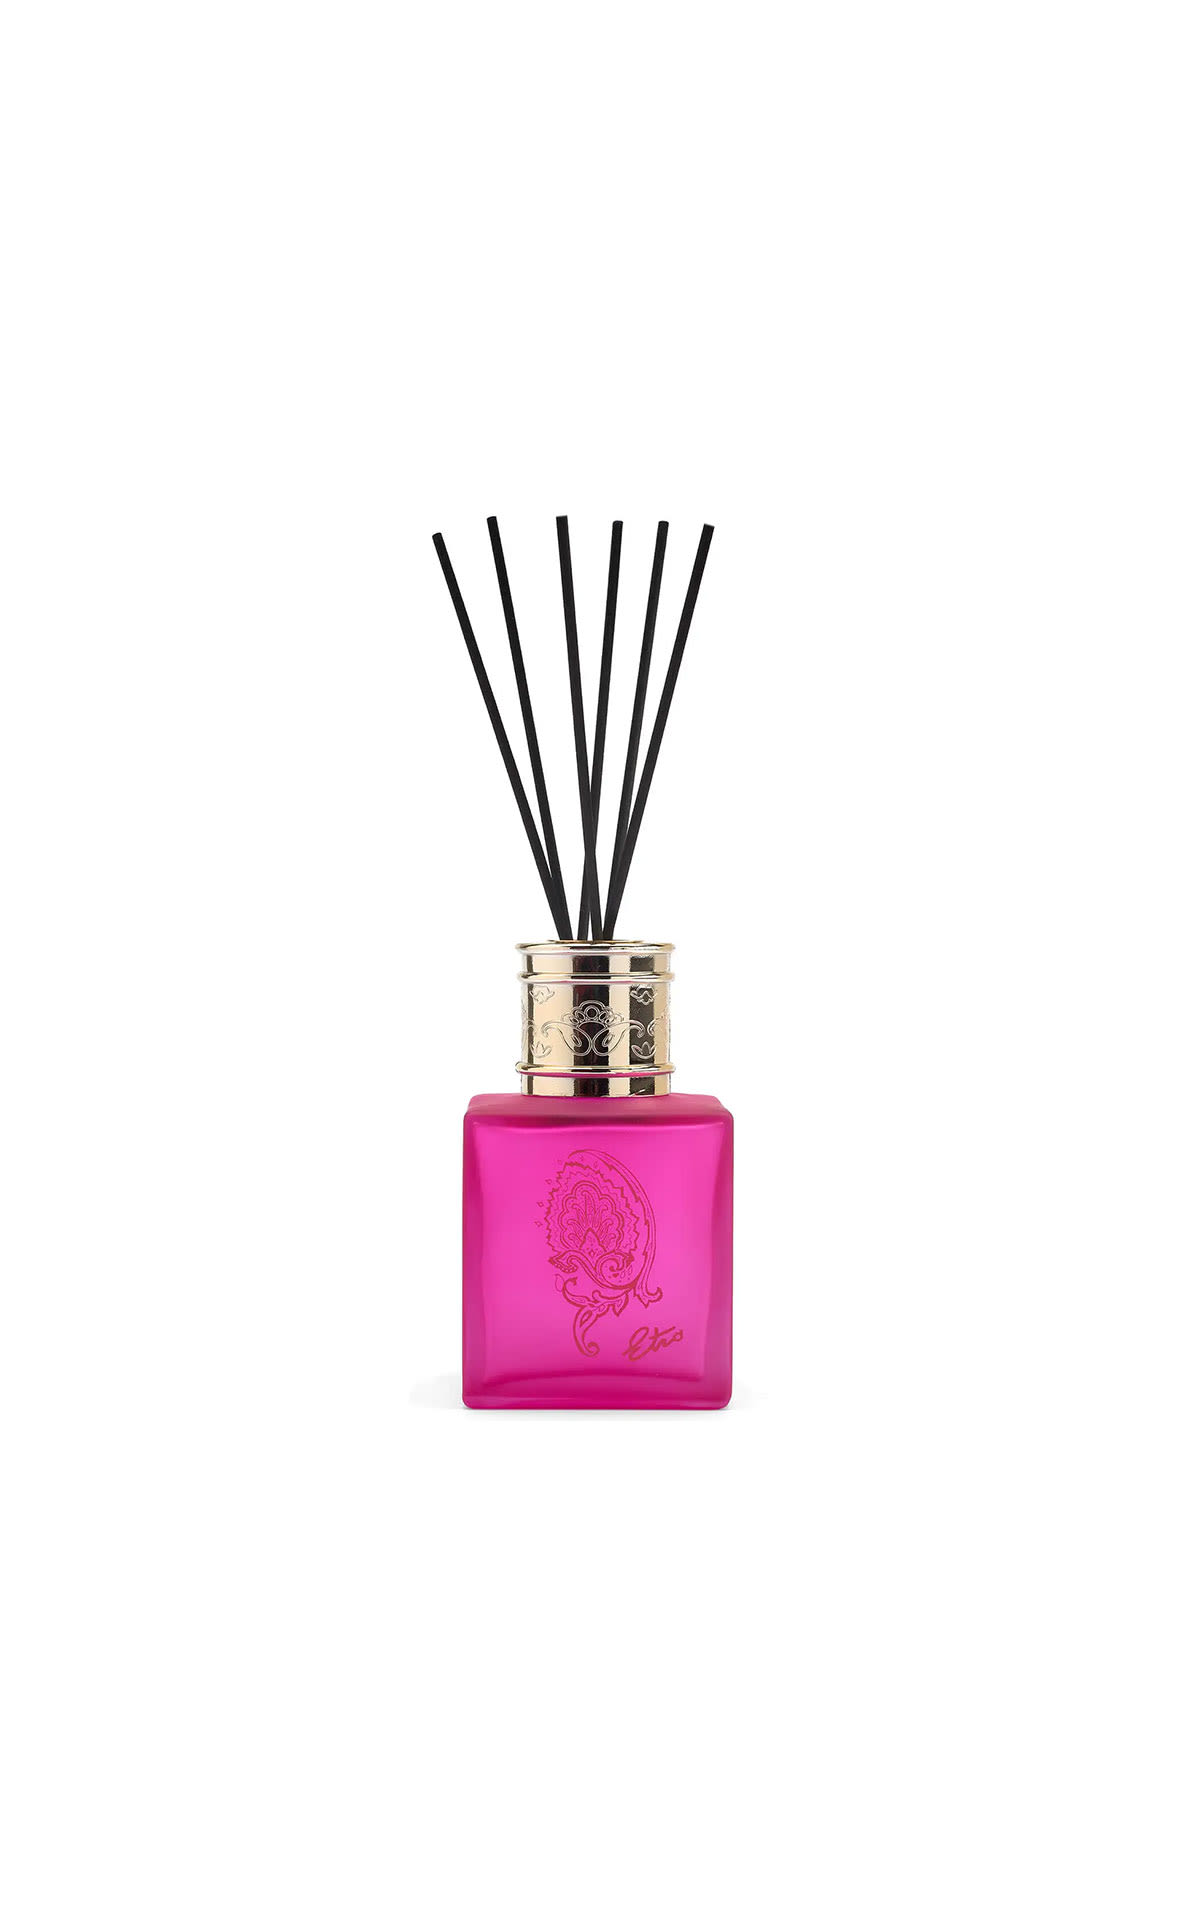 Etro Ambient diffuser 250ml from Bicester Village